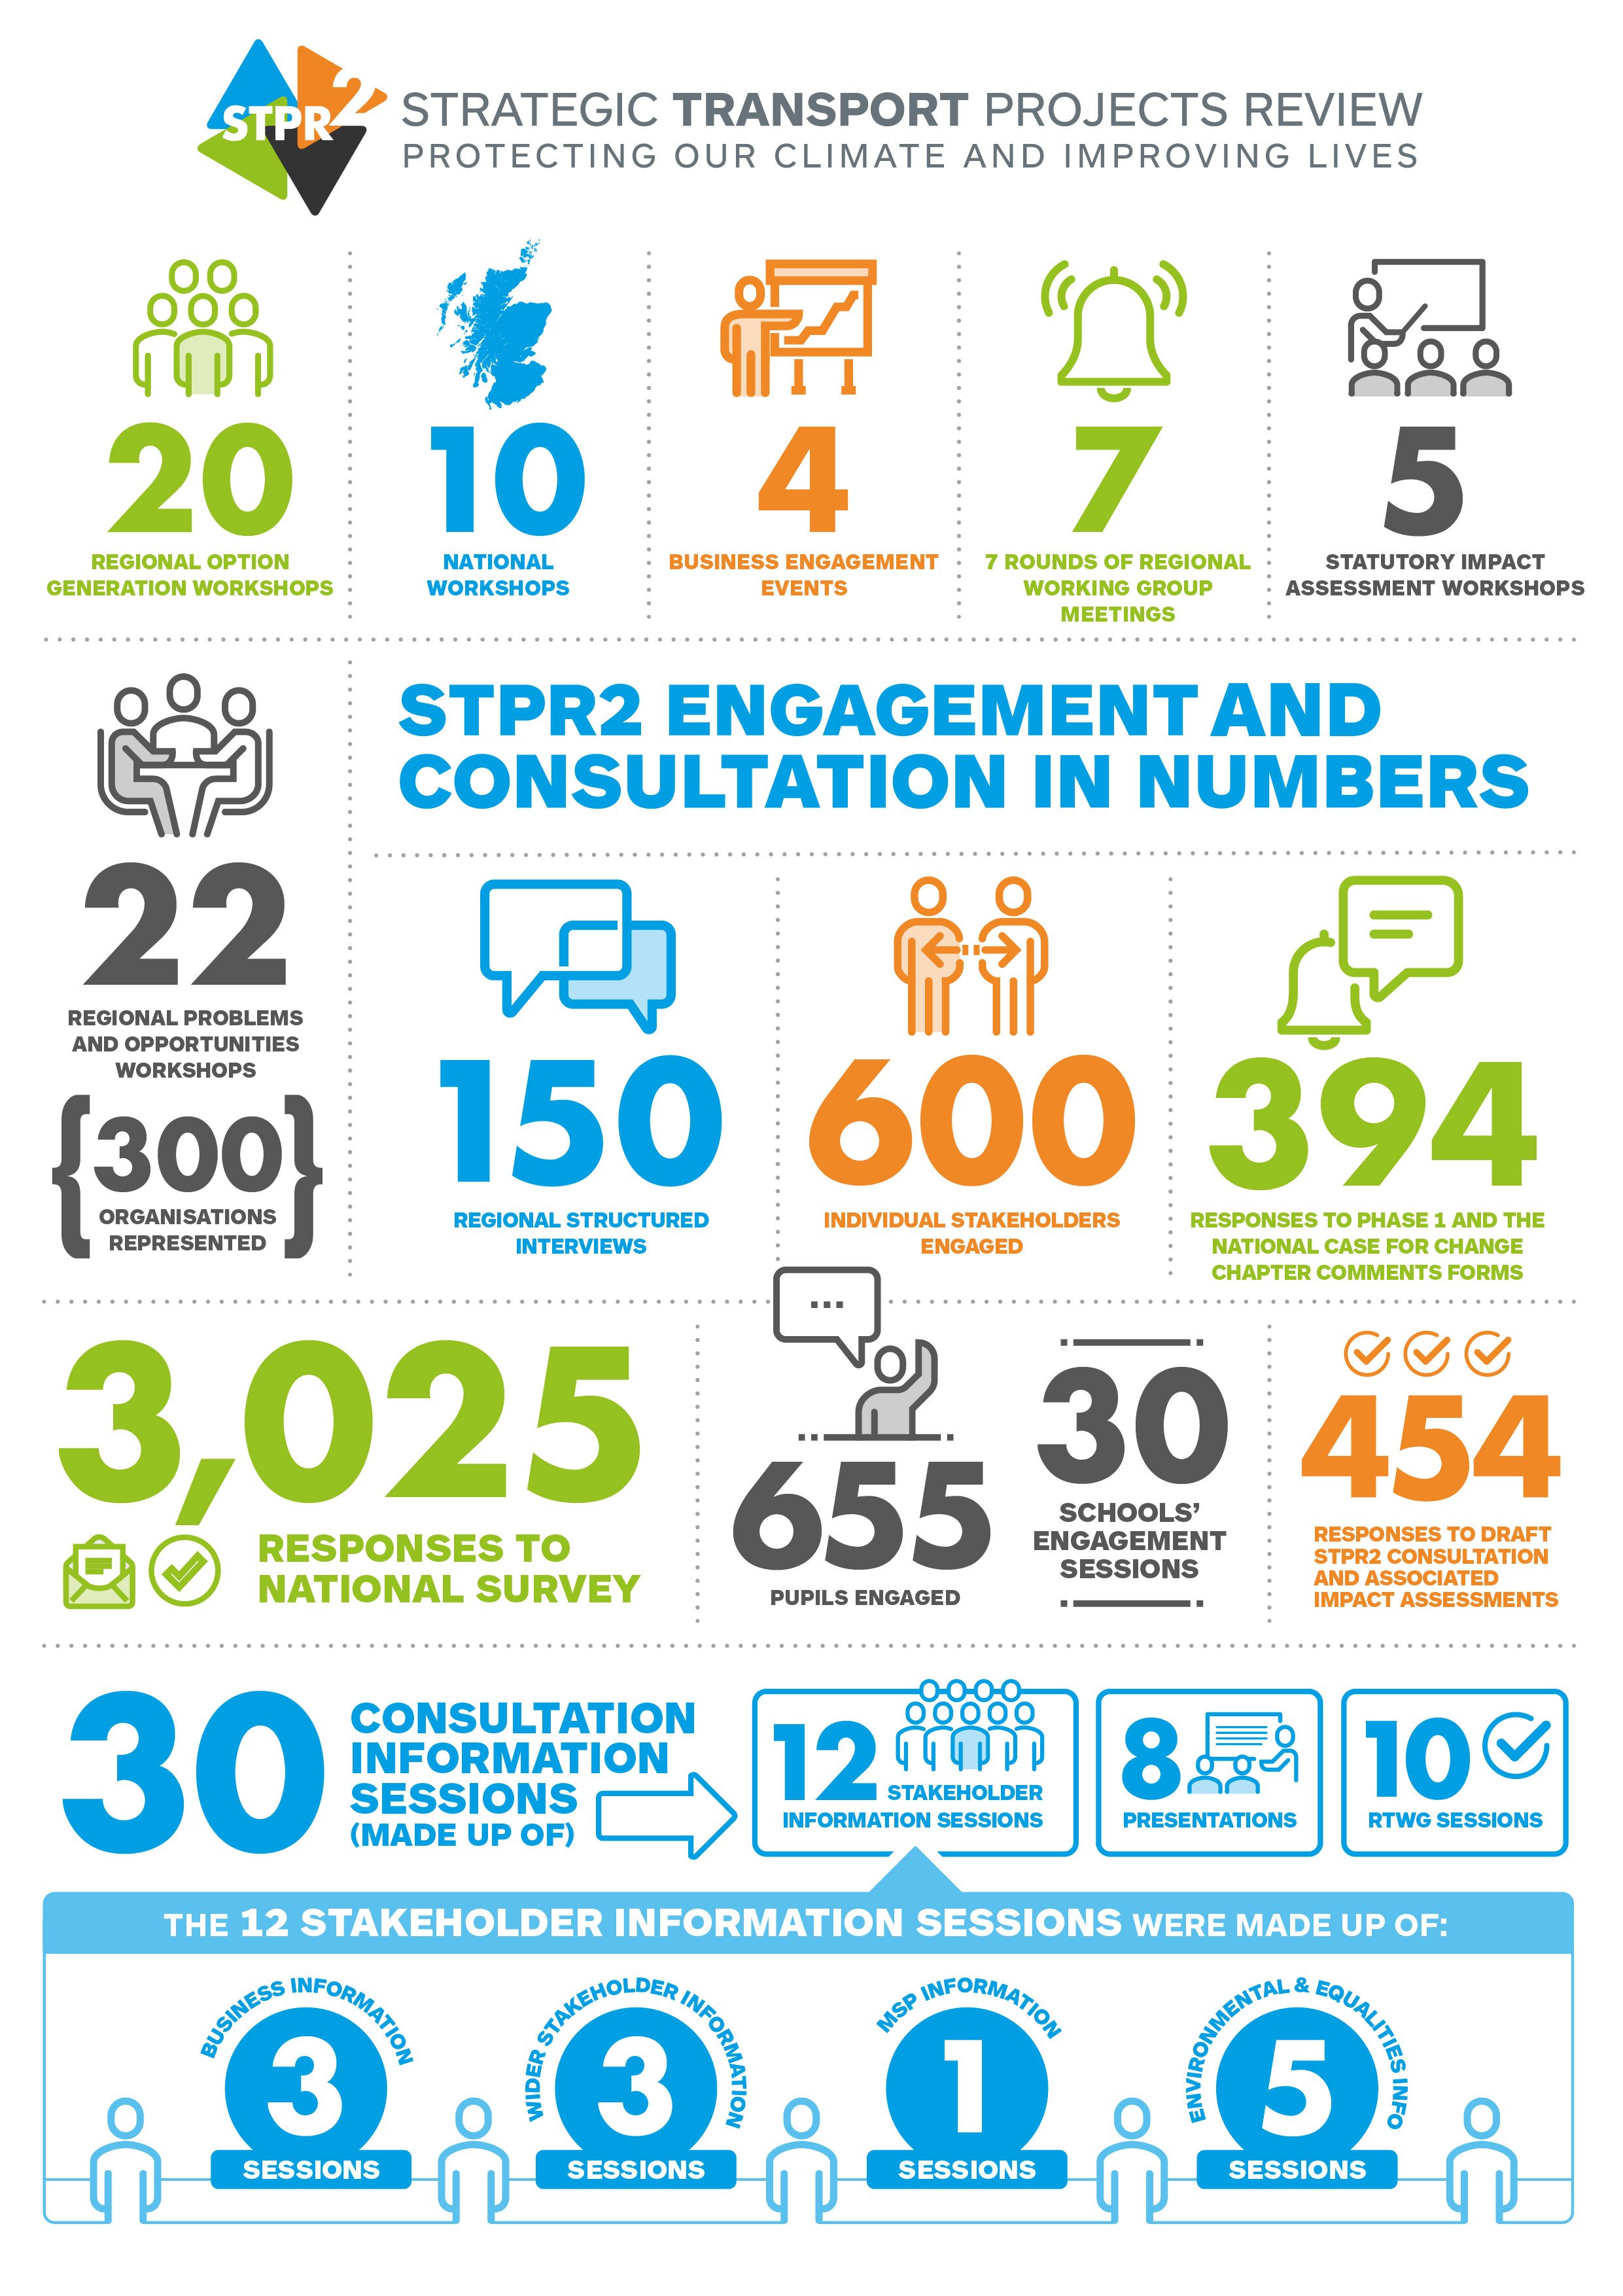 STPR2 Engagement and consultation in numbers -a content fully explained in text above